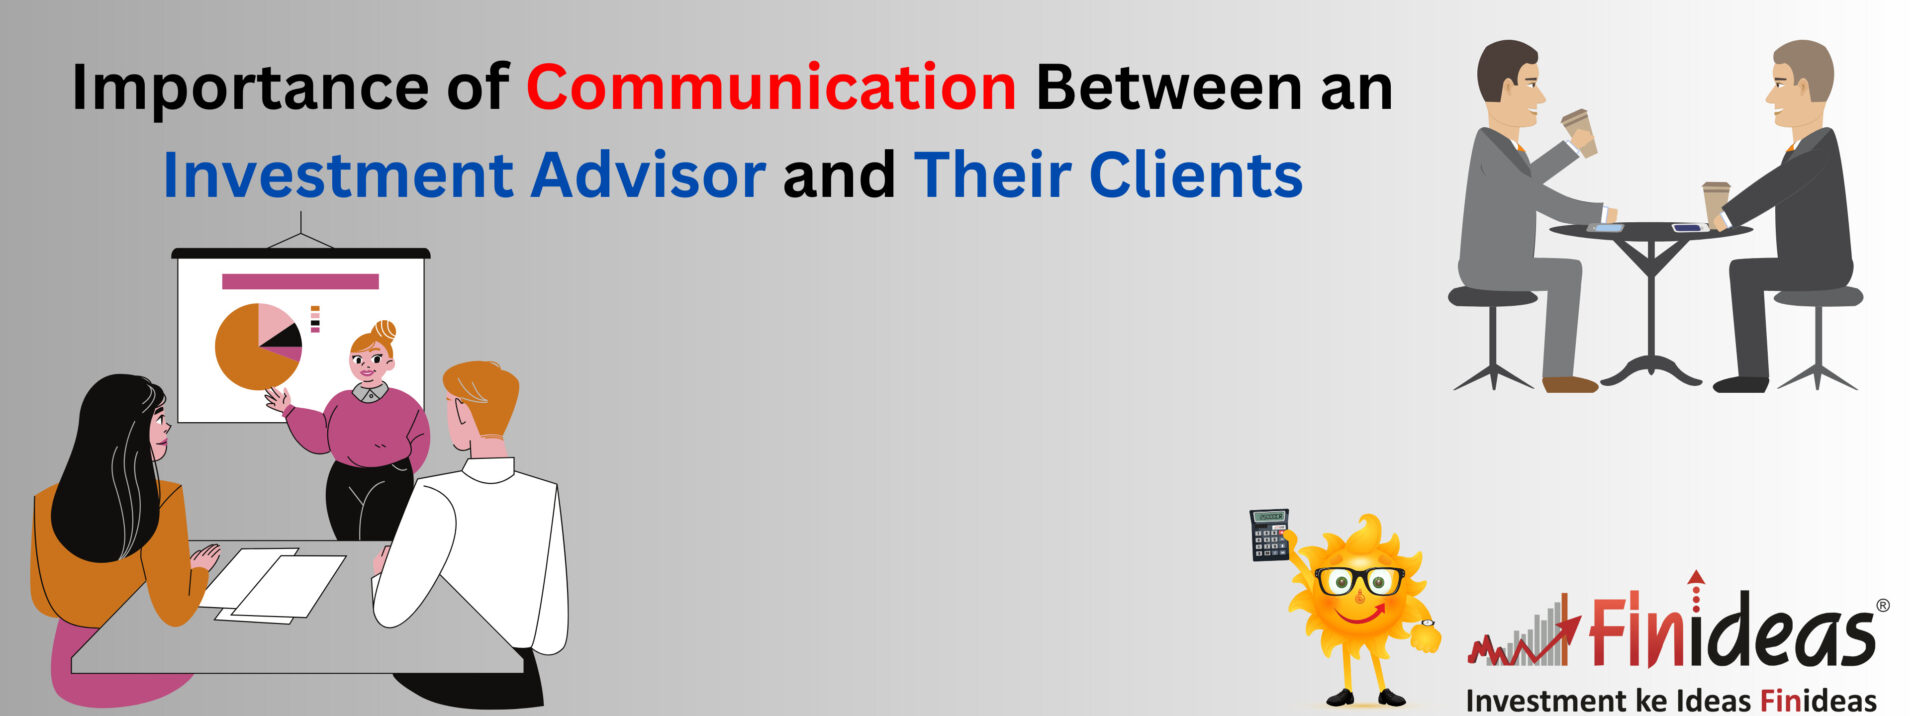 Importance-of-Communication-Between-an-Investment-Advisor-and-Their-Clients